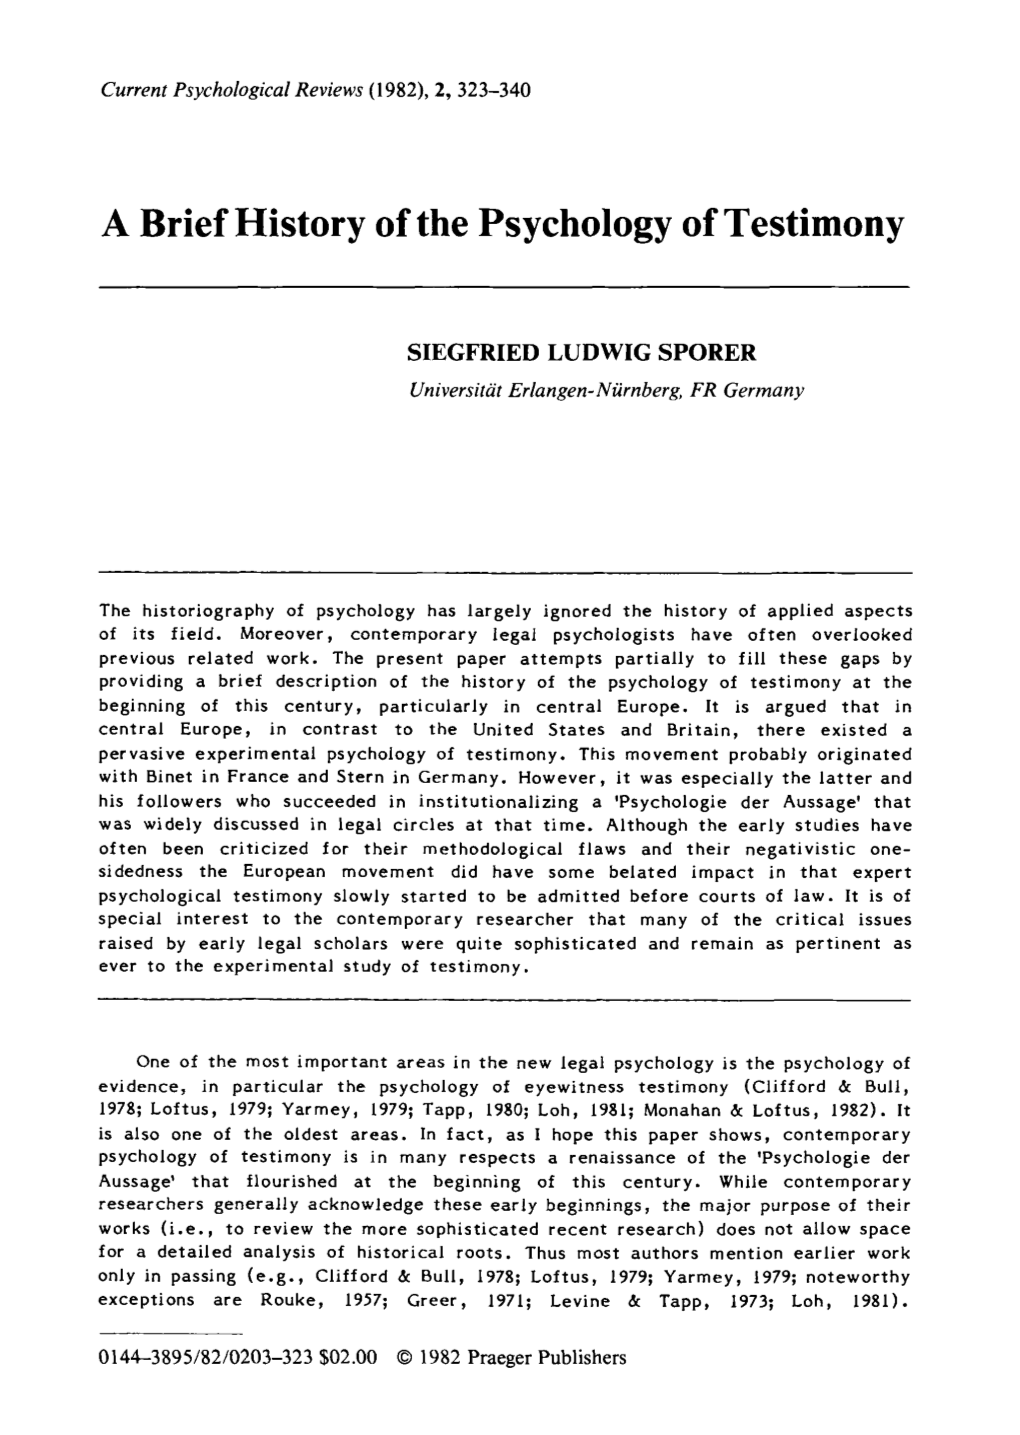 A Brief History of the Psychology of Testimony